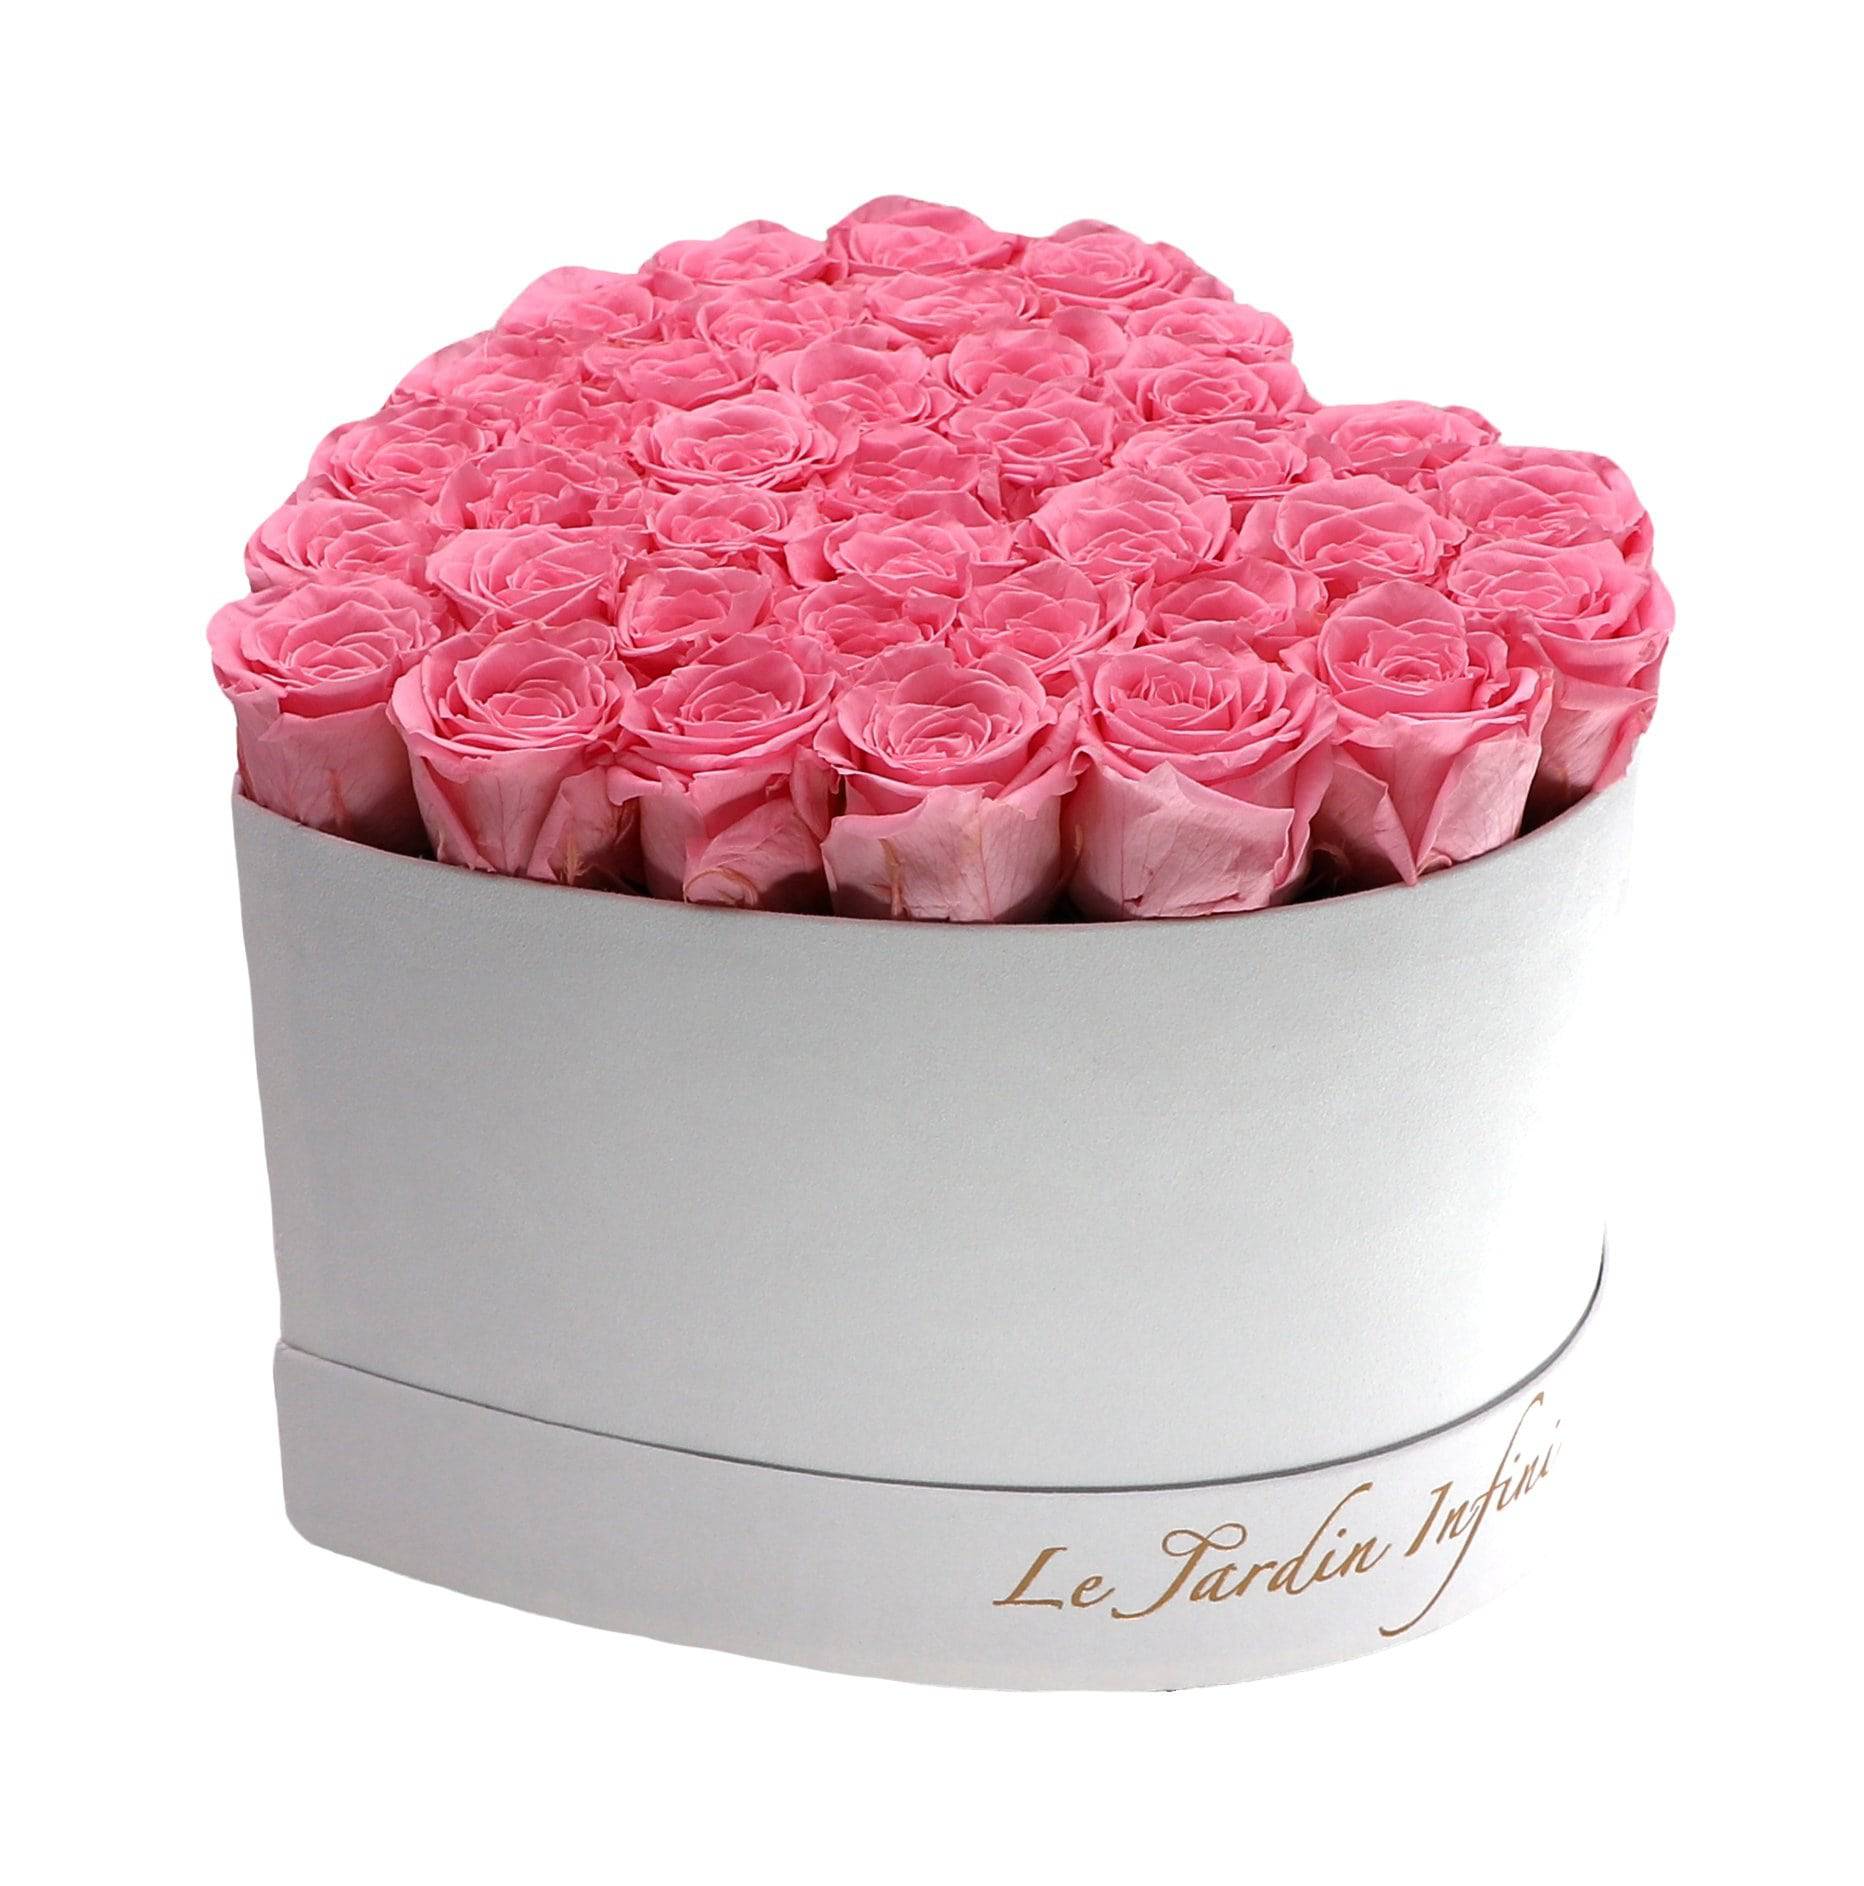 36 Pink Preserved Roses in A Heart Shaped Box- Small Heart Luxury White Suede Box